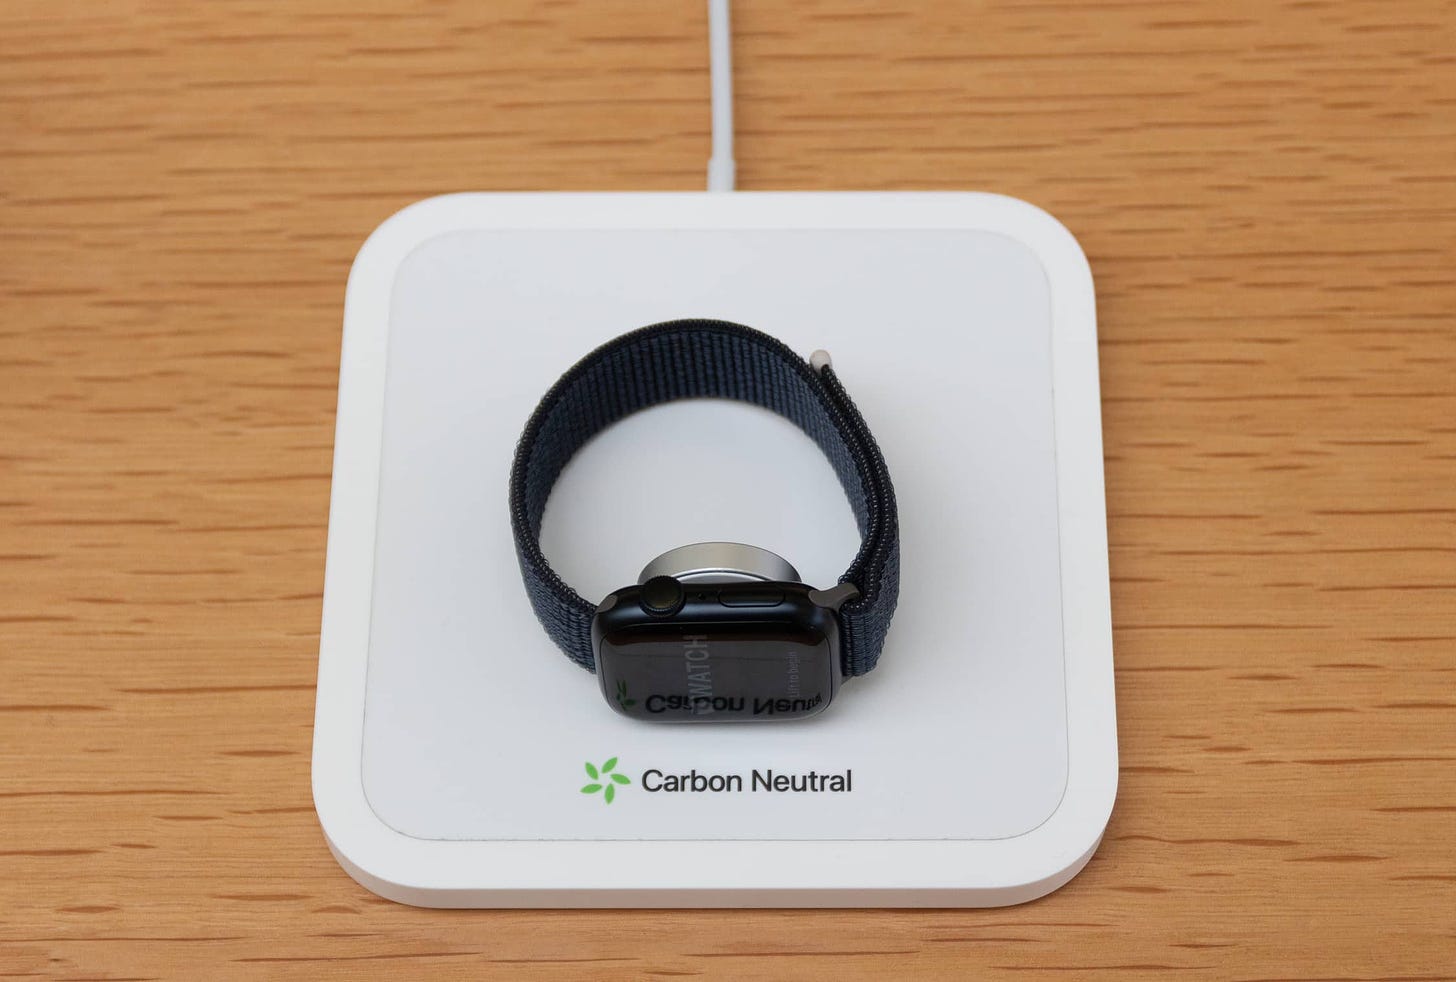 A dock labeled "Carbon Neutral" charges an Apple Watch Series 9 display device at an Apple Store.